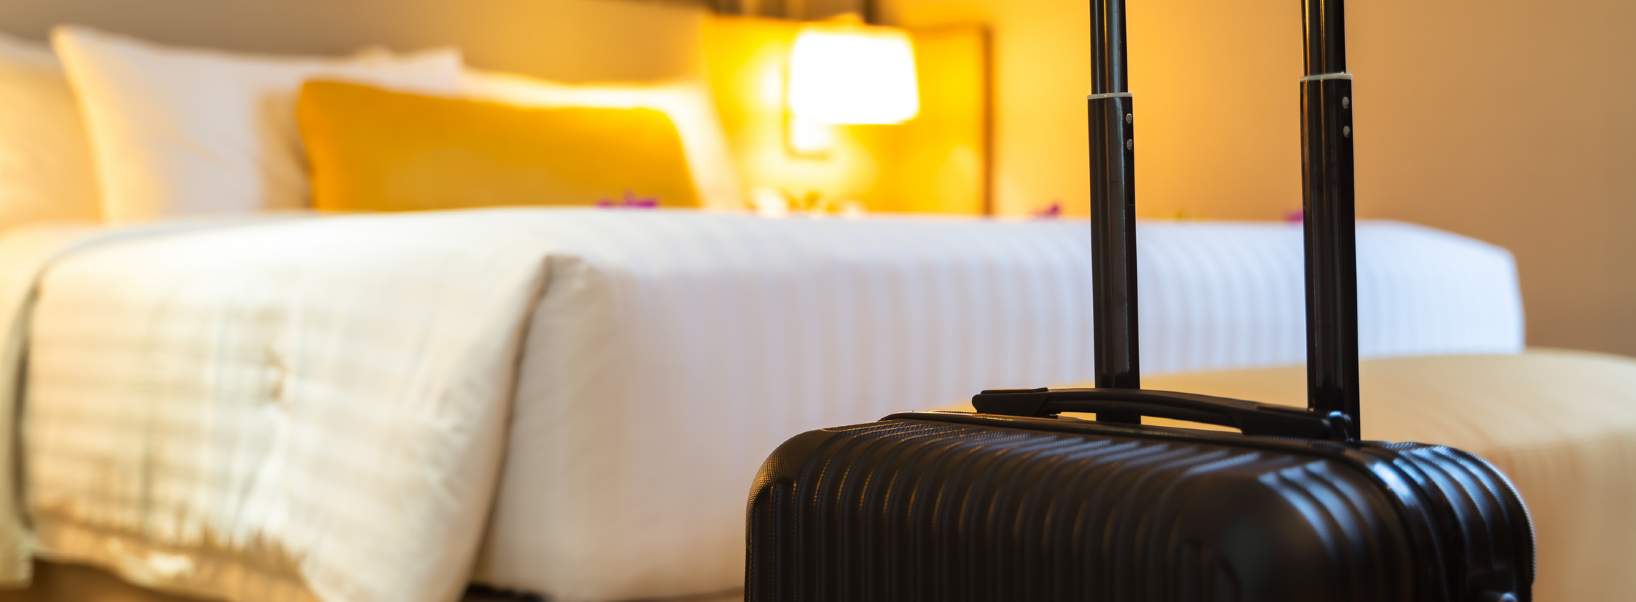 Hotels continue to prove a solid hedge against inflation